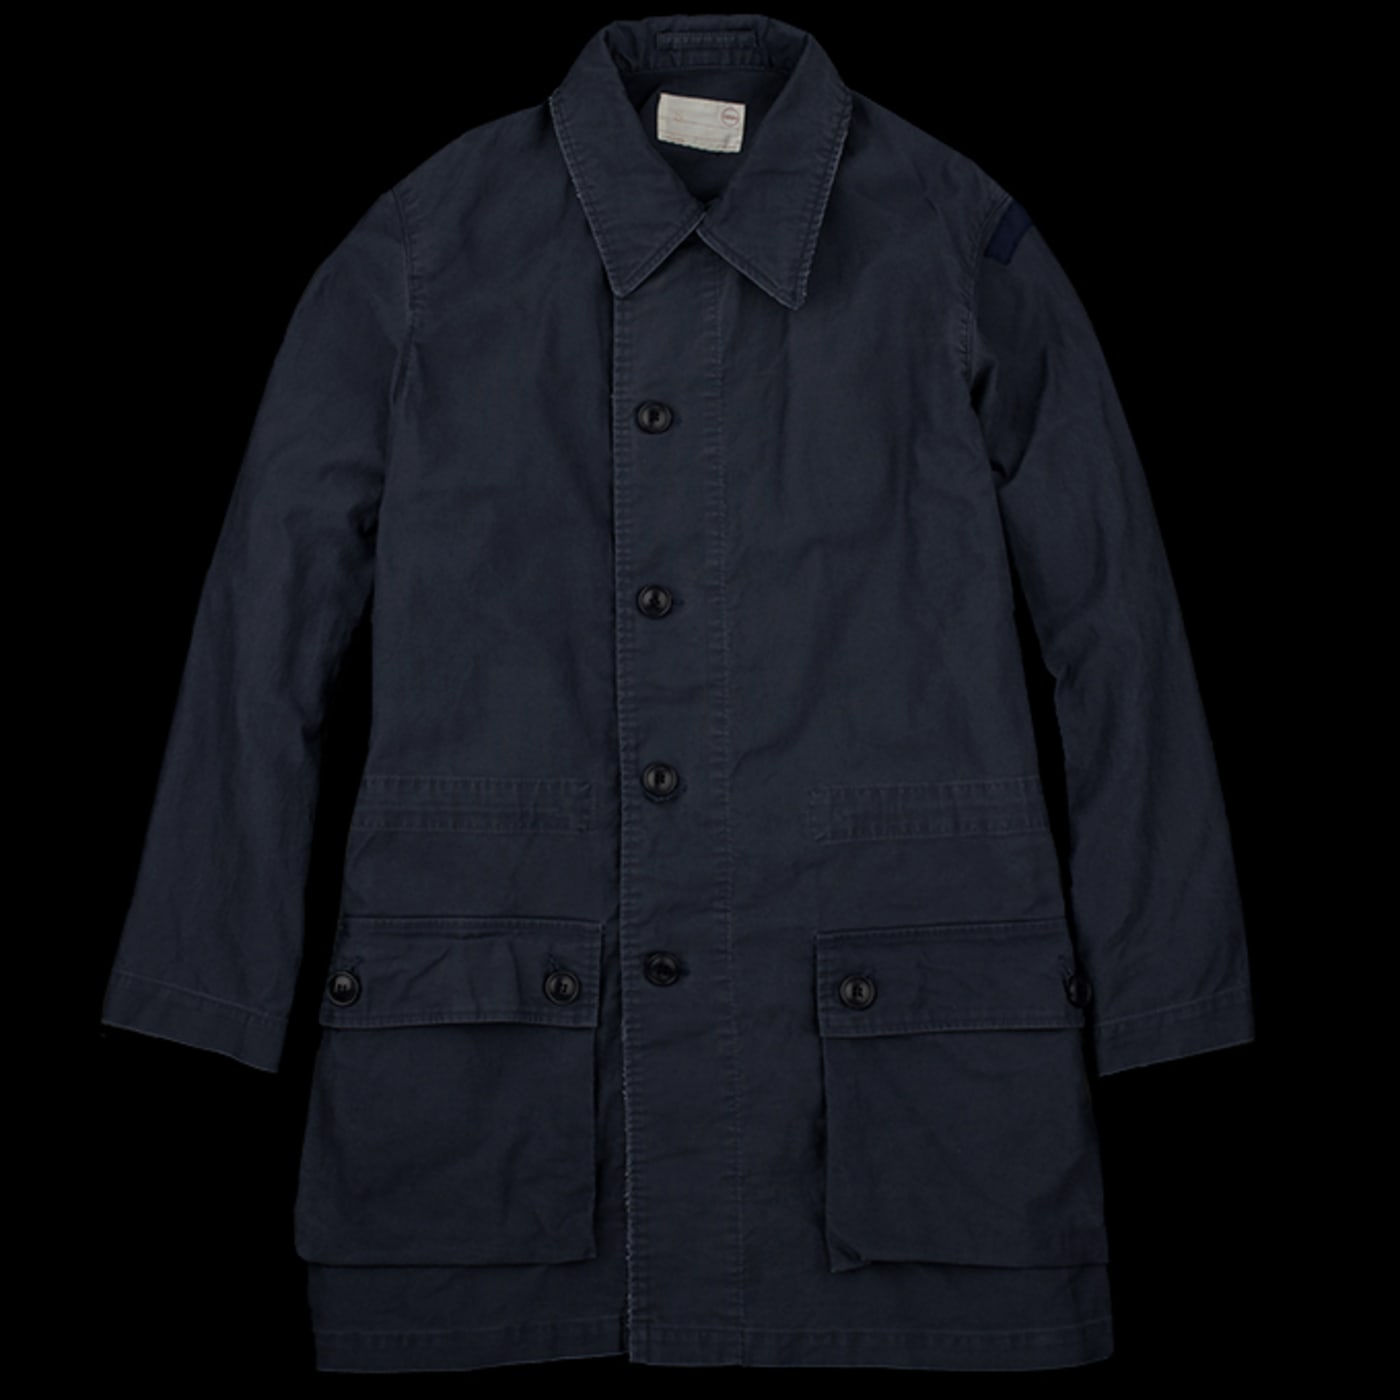 A Field Jacket Just As Good As All The Others We’ve Written About | Complex